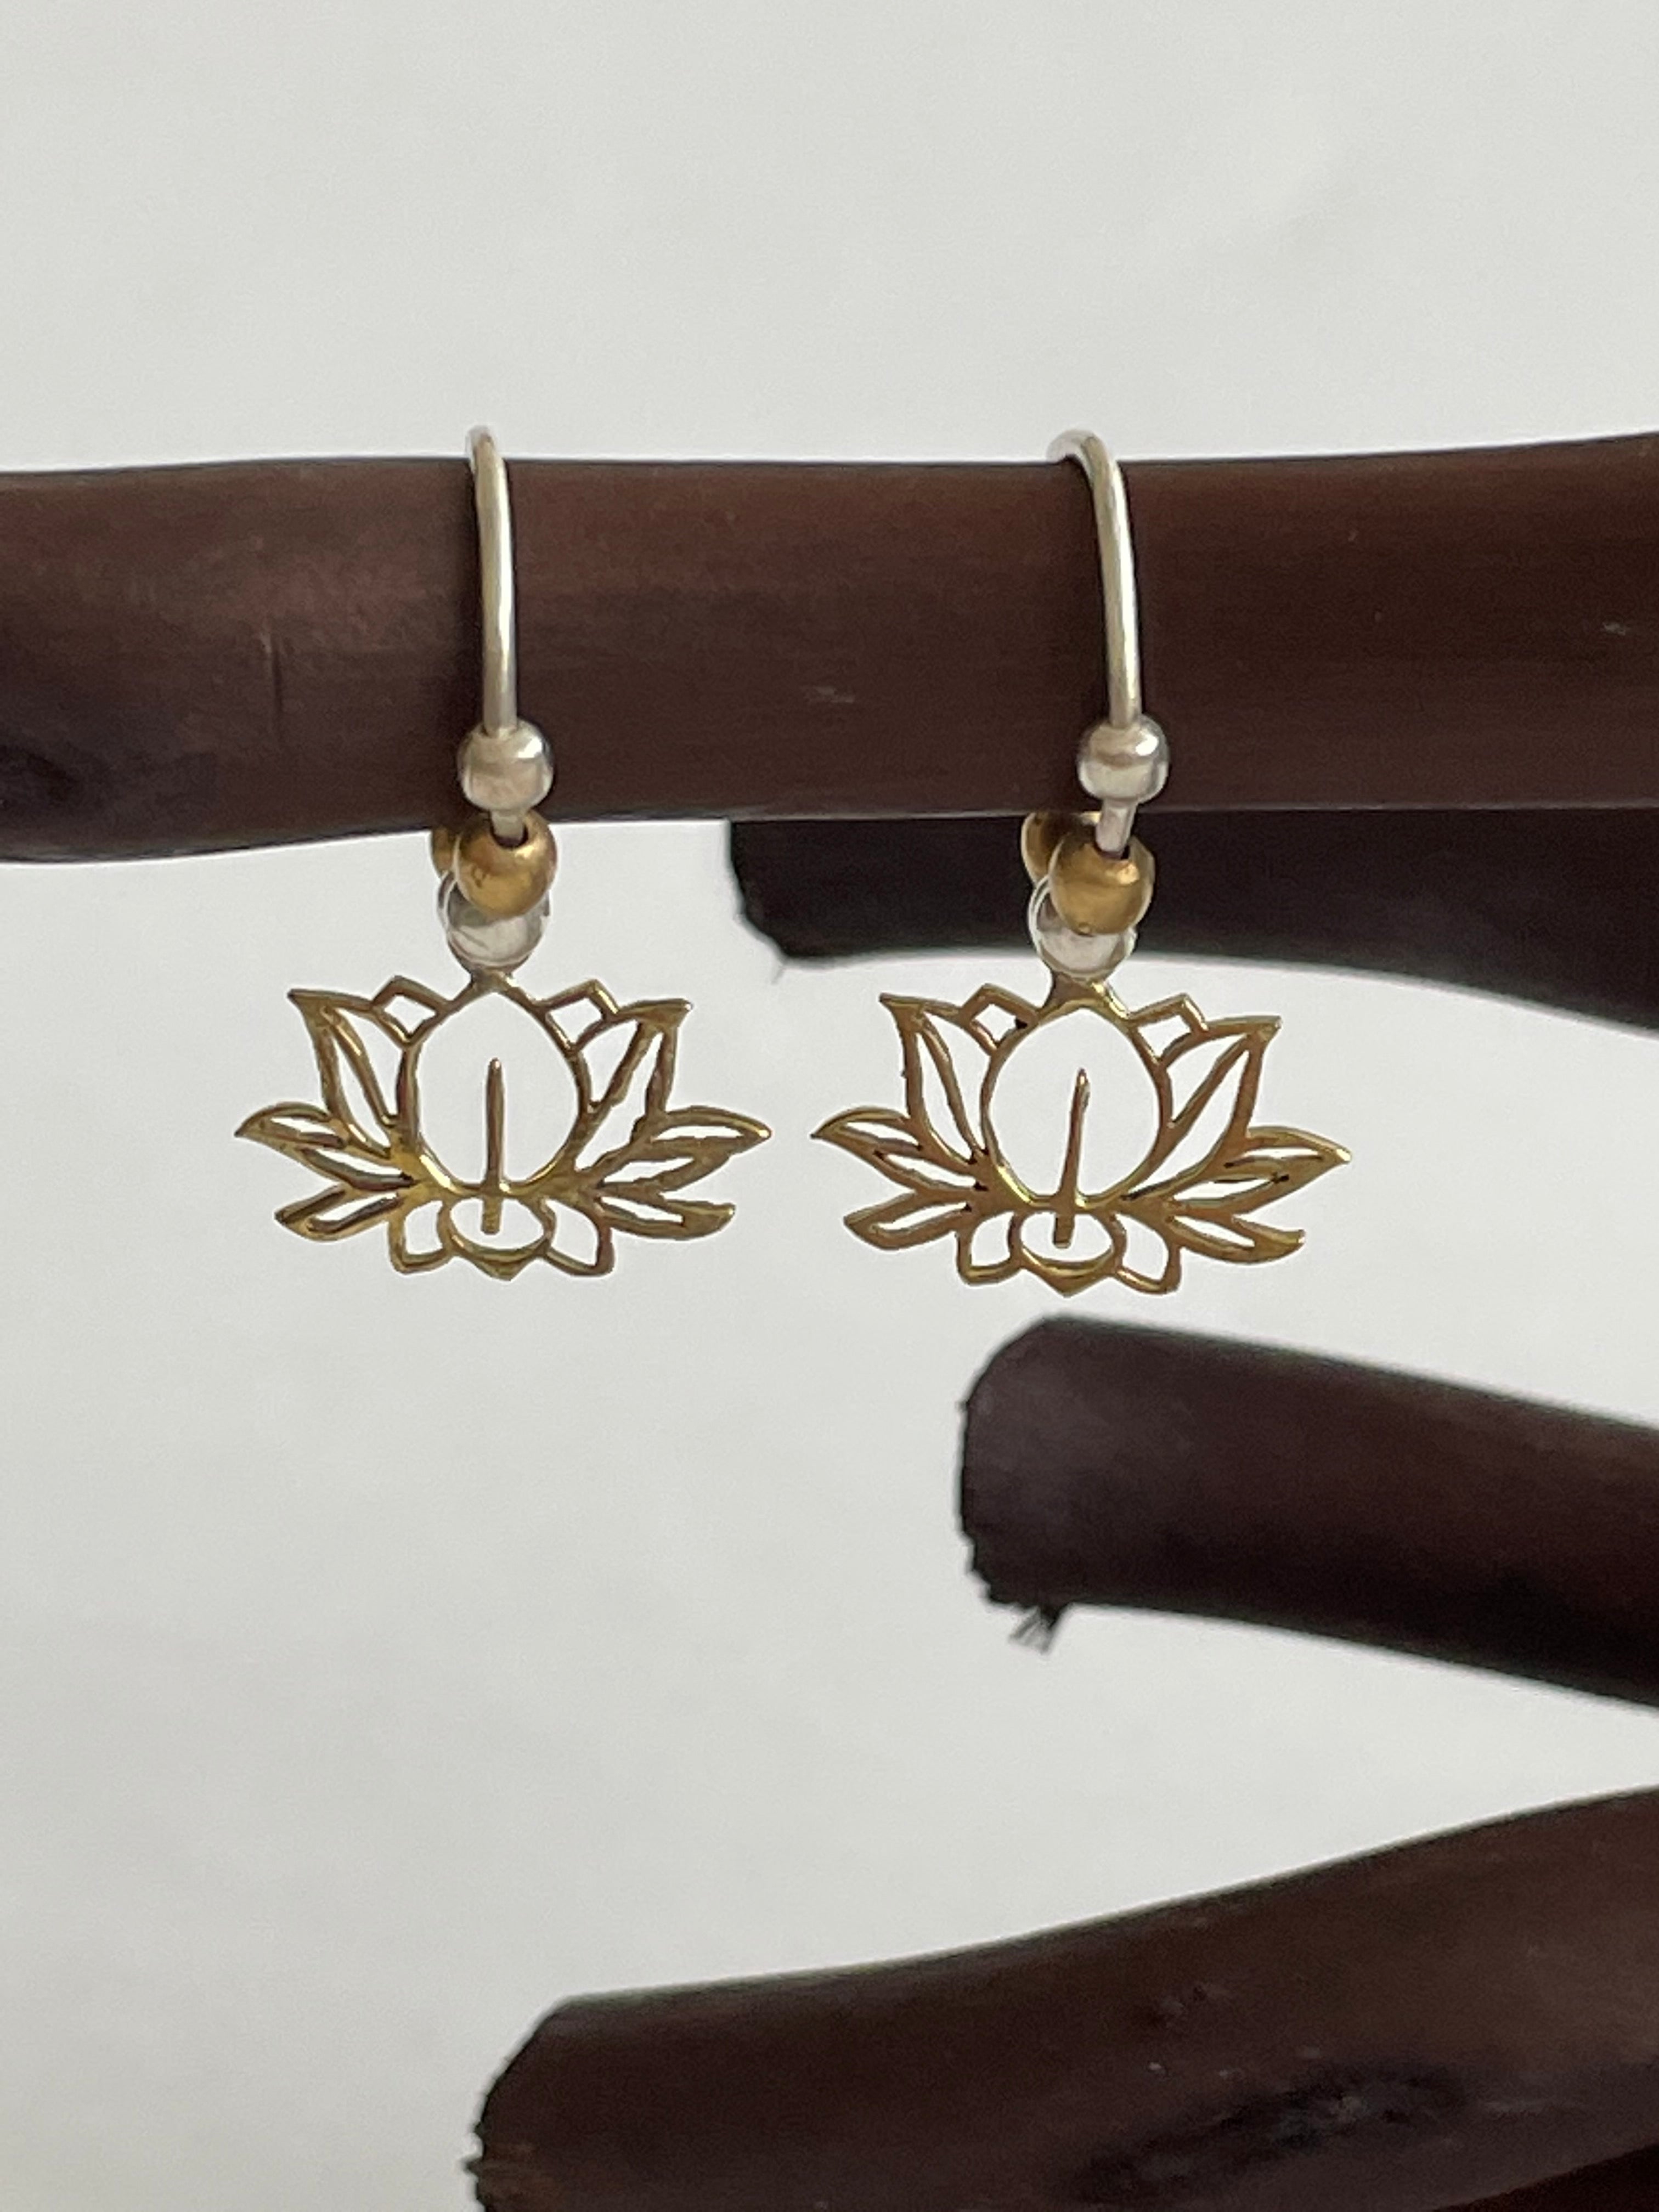 Lightweight, dainty hypoallergenic brass lotus earrings with brass and silver-colored beads. They are handmade and fair trade. Perfect gift for self or others. The lotus symbolizes purity, strength and enlightenment. It also reminds us that we all have to move through the mud to get to the light. Cost is $18.00.